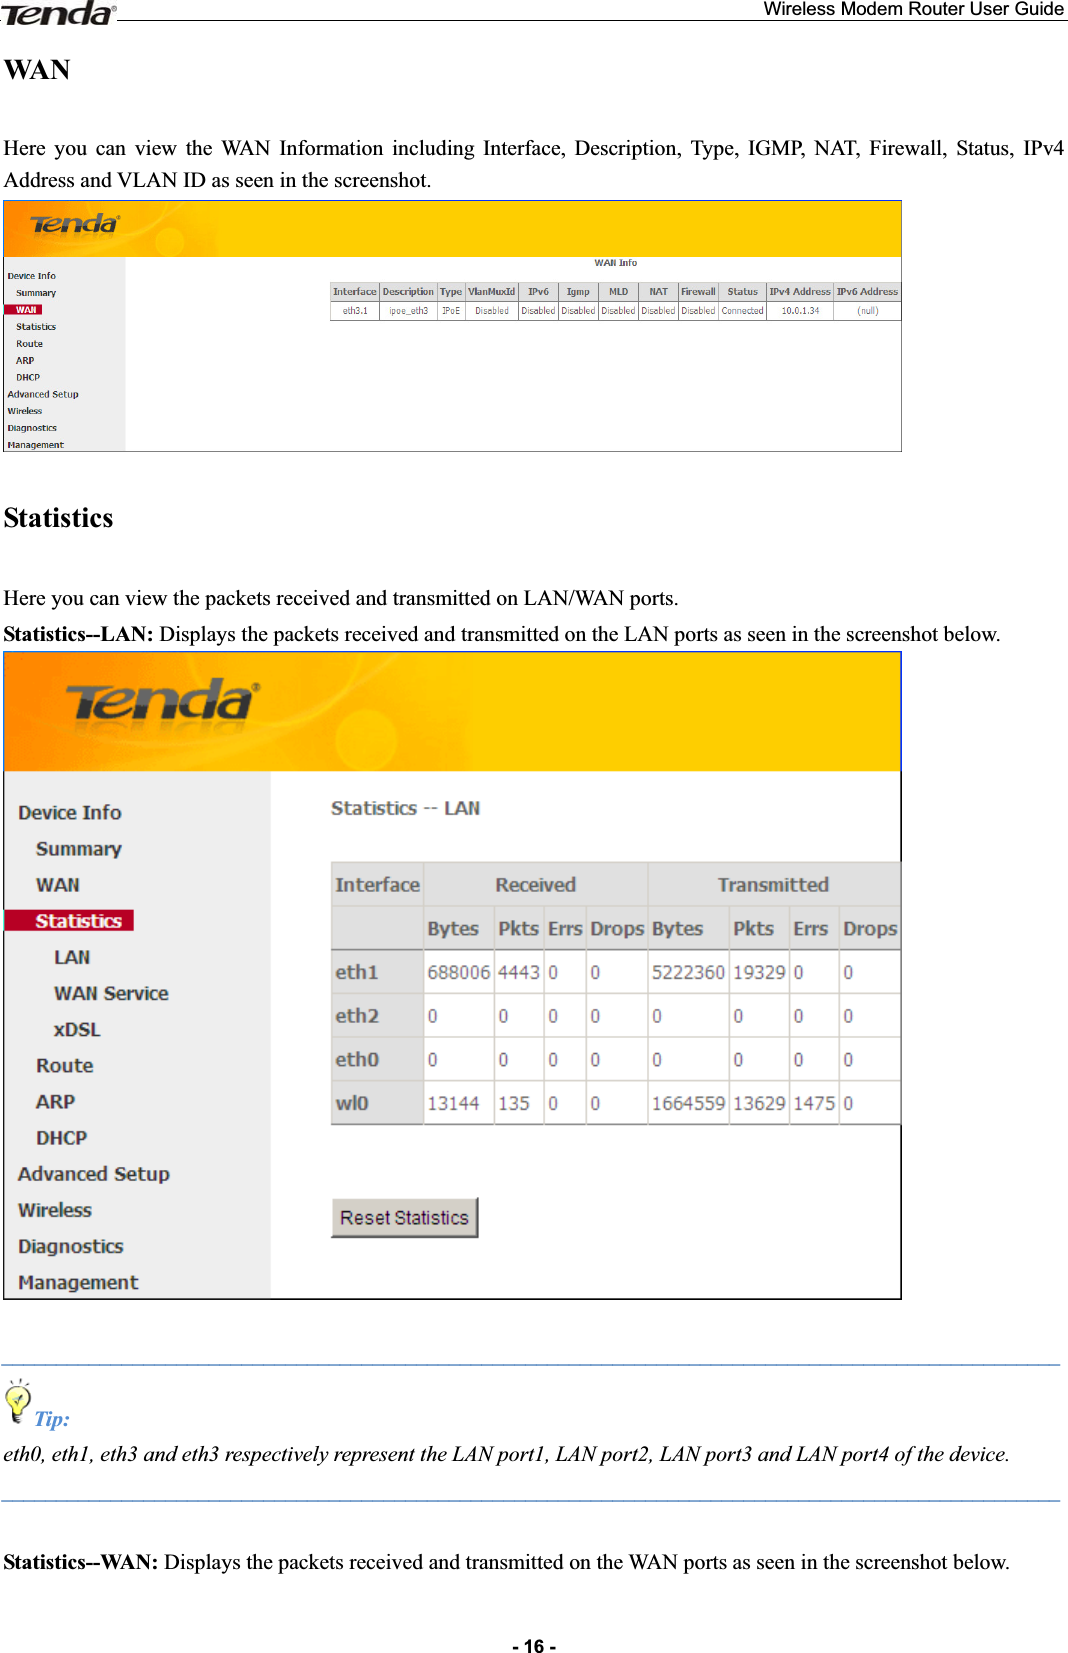 Wireless Modem Router User Guide- 16 -WAN  Here you can view the WAN Information including Interface, Description, Type, IGMP, NAT, Firewall, Status, IPv4 Address and VLAN ID as seen in the screenshot. Statistics  Here you can view the packets received and transmitted on LAN/WAN ports. Statistics--LAN: Displays the packets received and transmitted on the LAN ports as seen in the screenshot below. _________________________________________________________________________________________________Tip: eth0, eth1, eth3 and eth3 respectively represent the LAN port1, LAN port2, LAN port3 and LAN port4 of the device. _________________________________________________________________________________________________Statistics--WAN: Displays the packets received and transmitted on the WAN ports as seen in the screenshot below. 